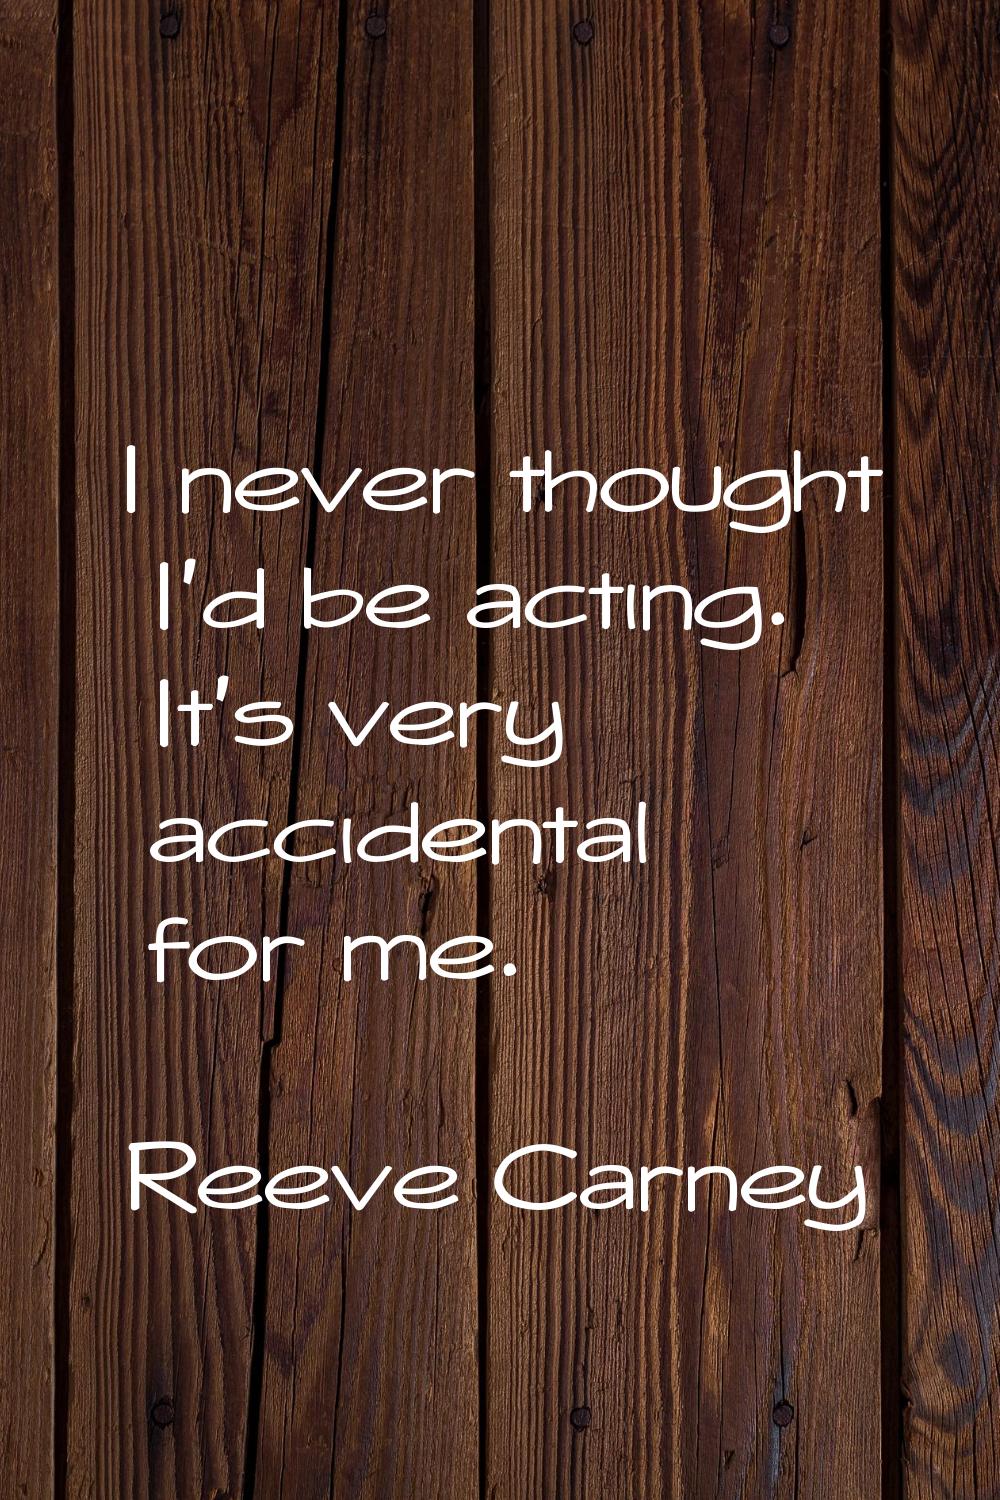 I never thought I'd be acting. It's very accidental for me.